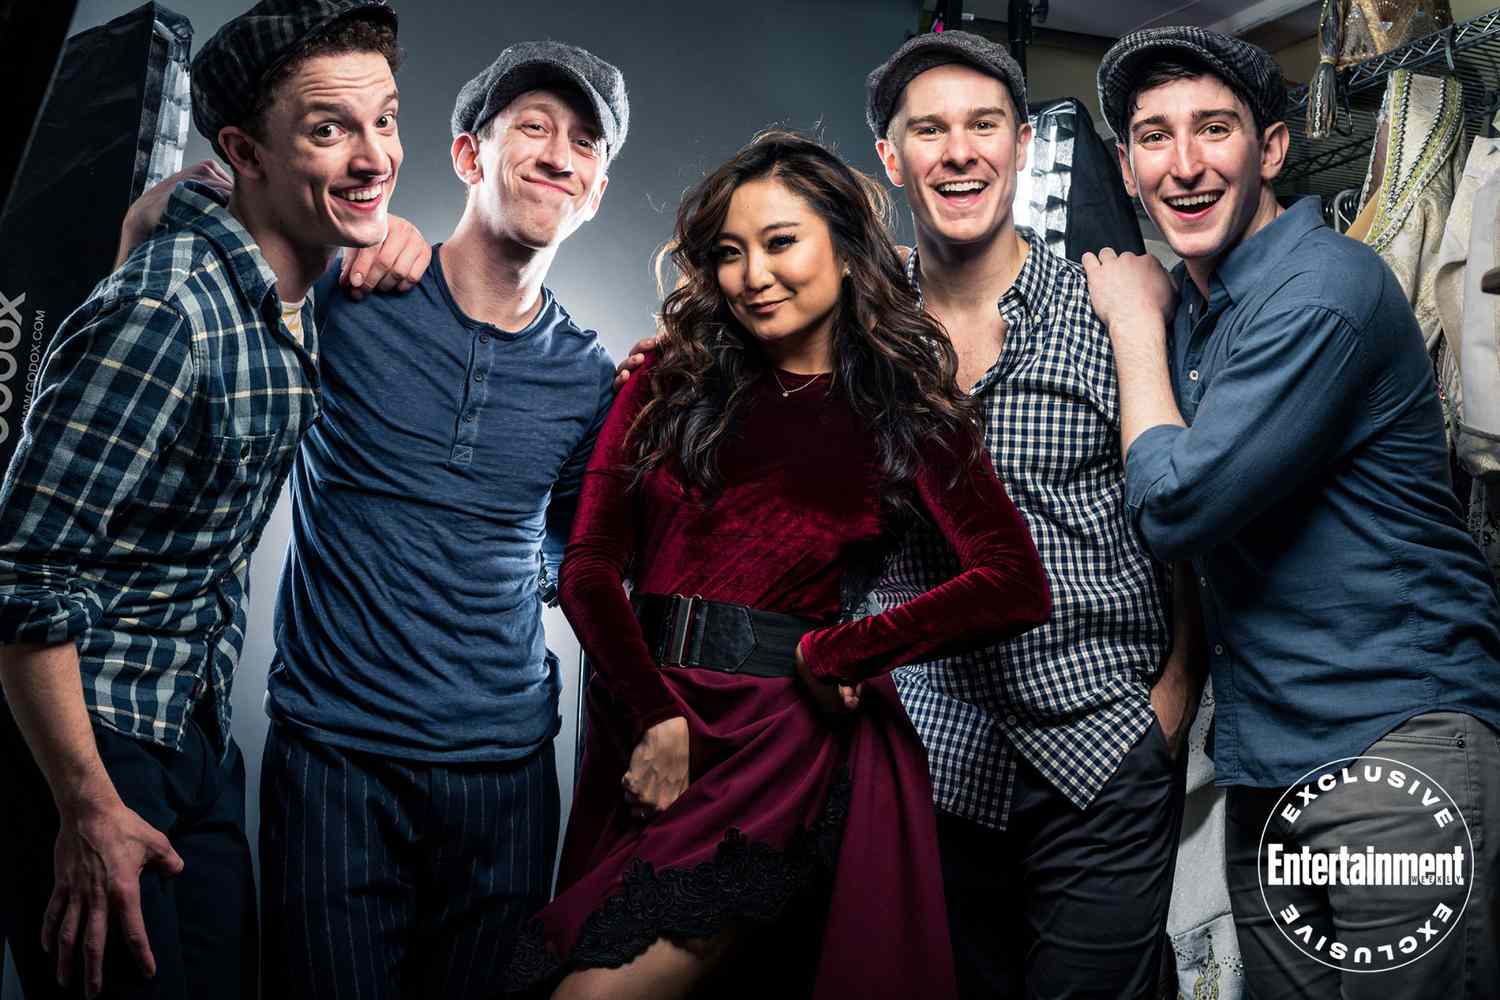 Newsies&nbsp;cast members Iain Young, Ryan Breslin, Ryan Steele, and Ben Fankhauser, with Ashley Park (center)